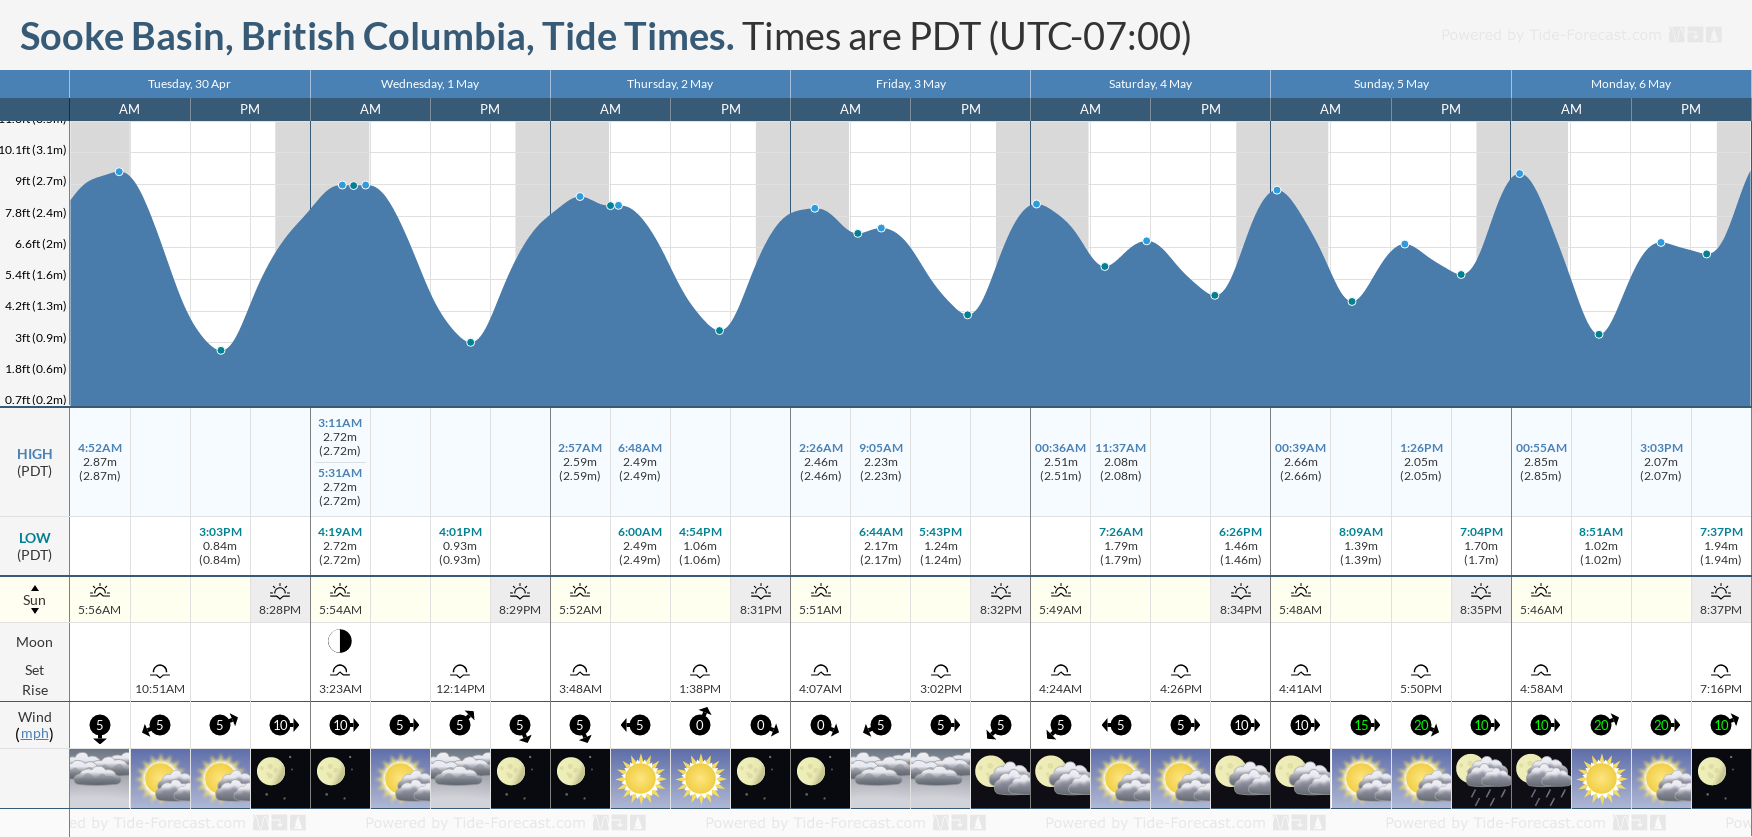 Sooke Basin, British Columbia Tide Chart including high and low tide tide times for the next 7 days